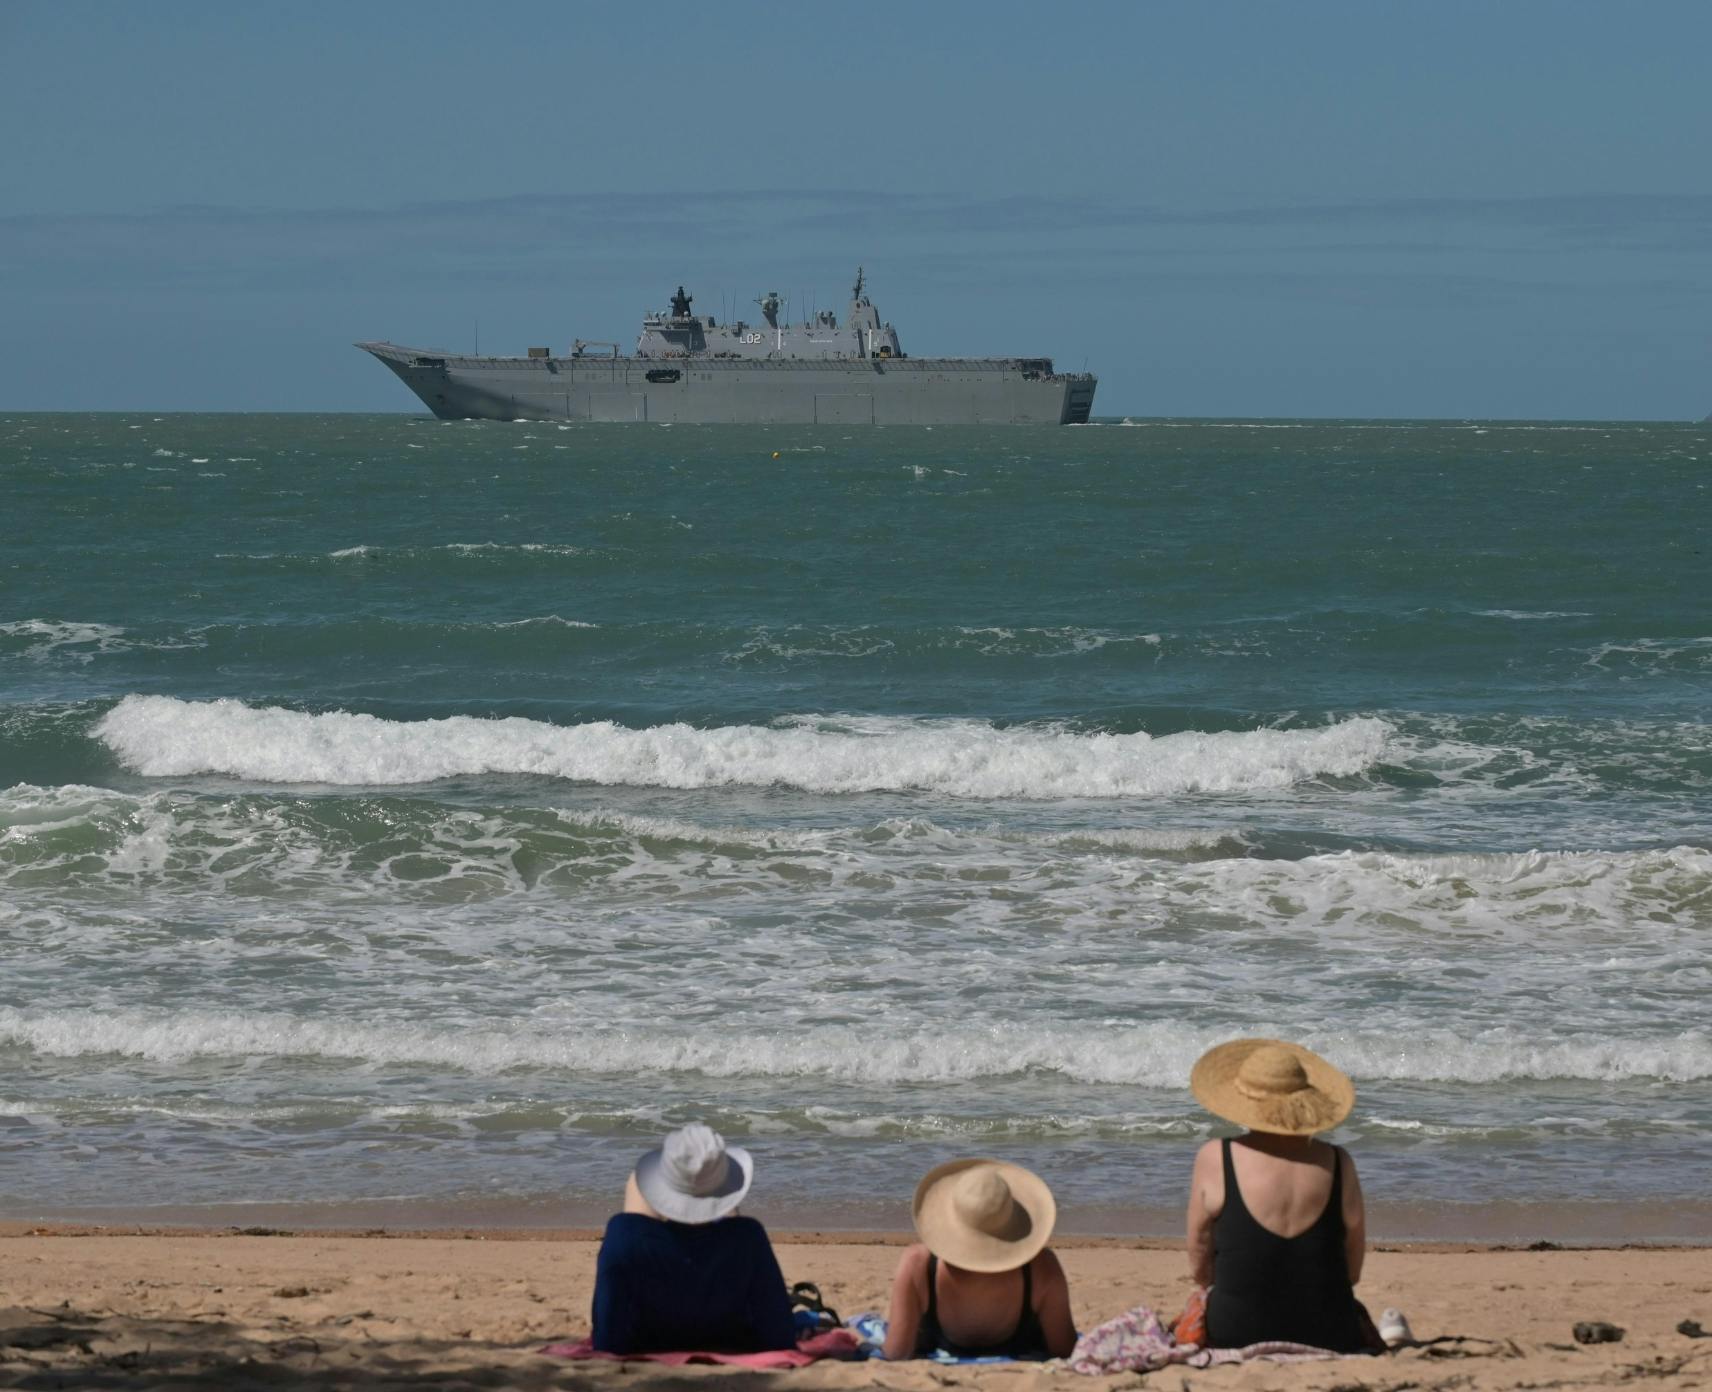 Beachgoers look at HMAS Adelaide Canberra-class landing, a Royal Australian Navy helicopter dock ship, in Townsville